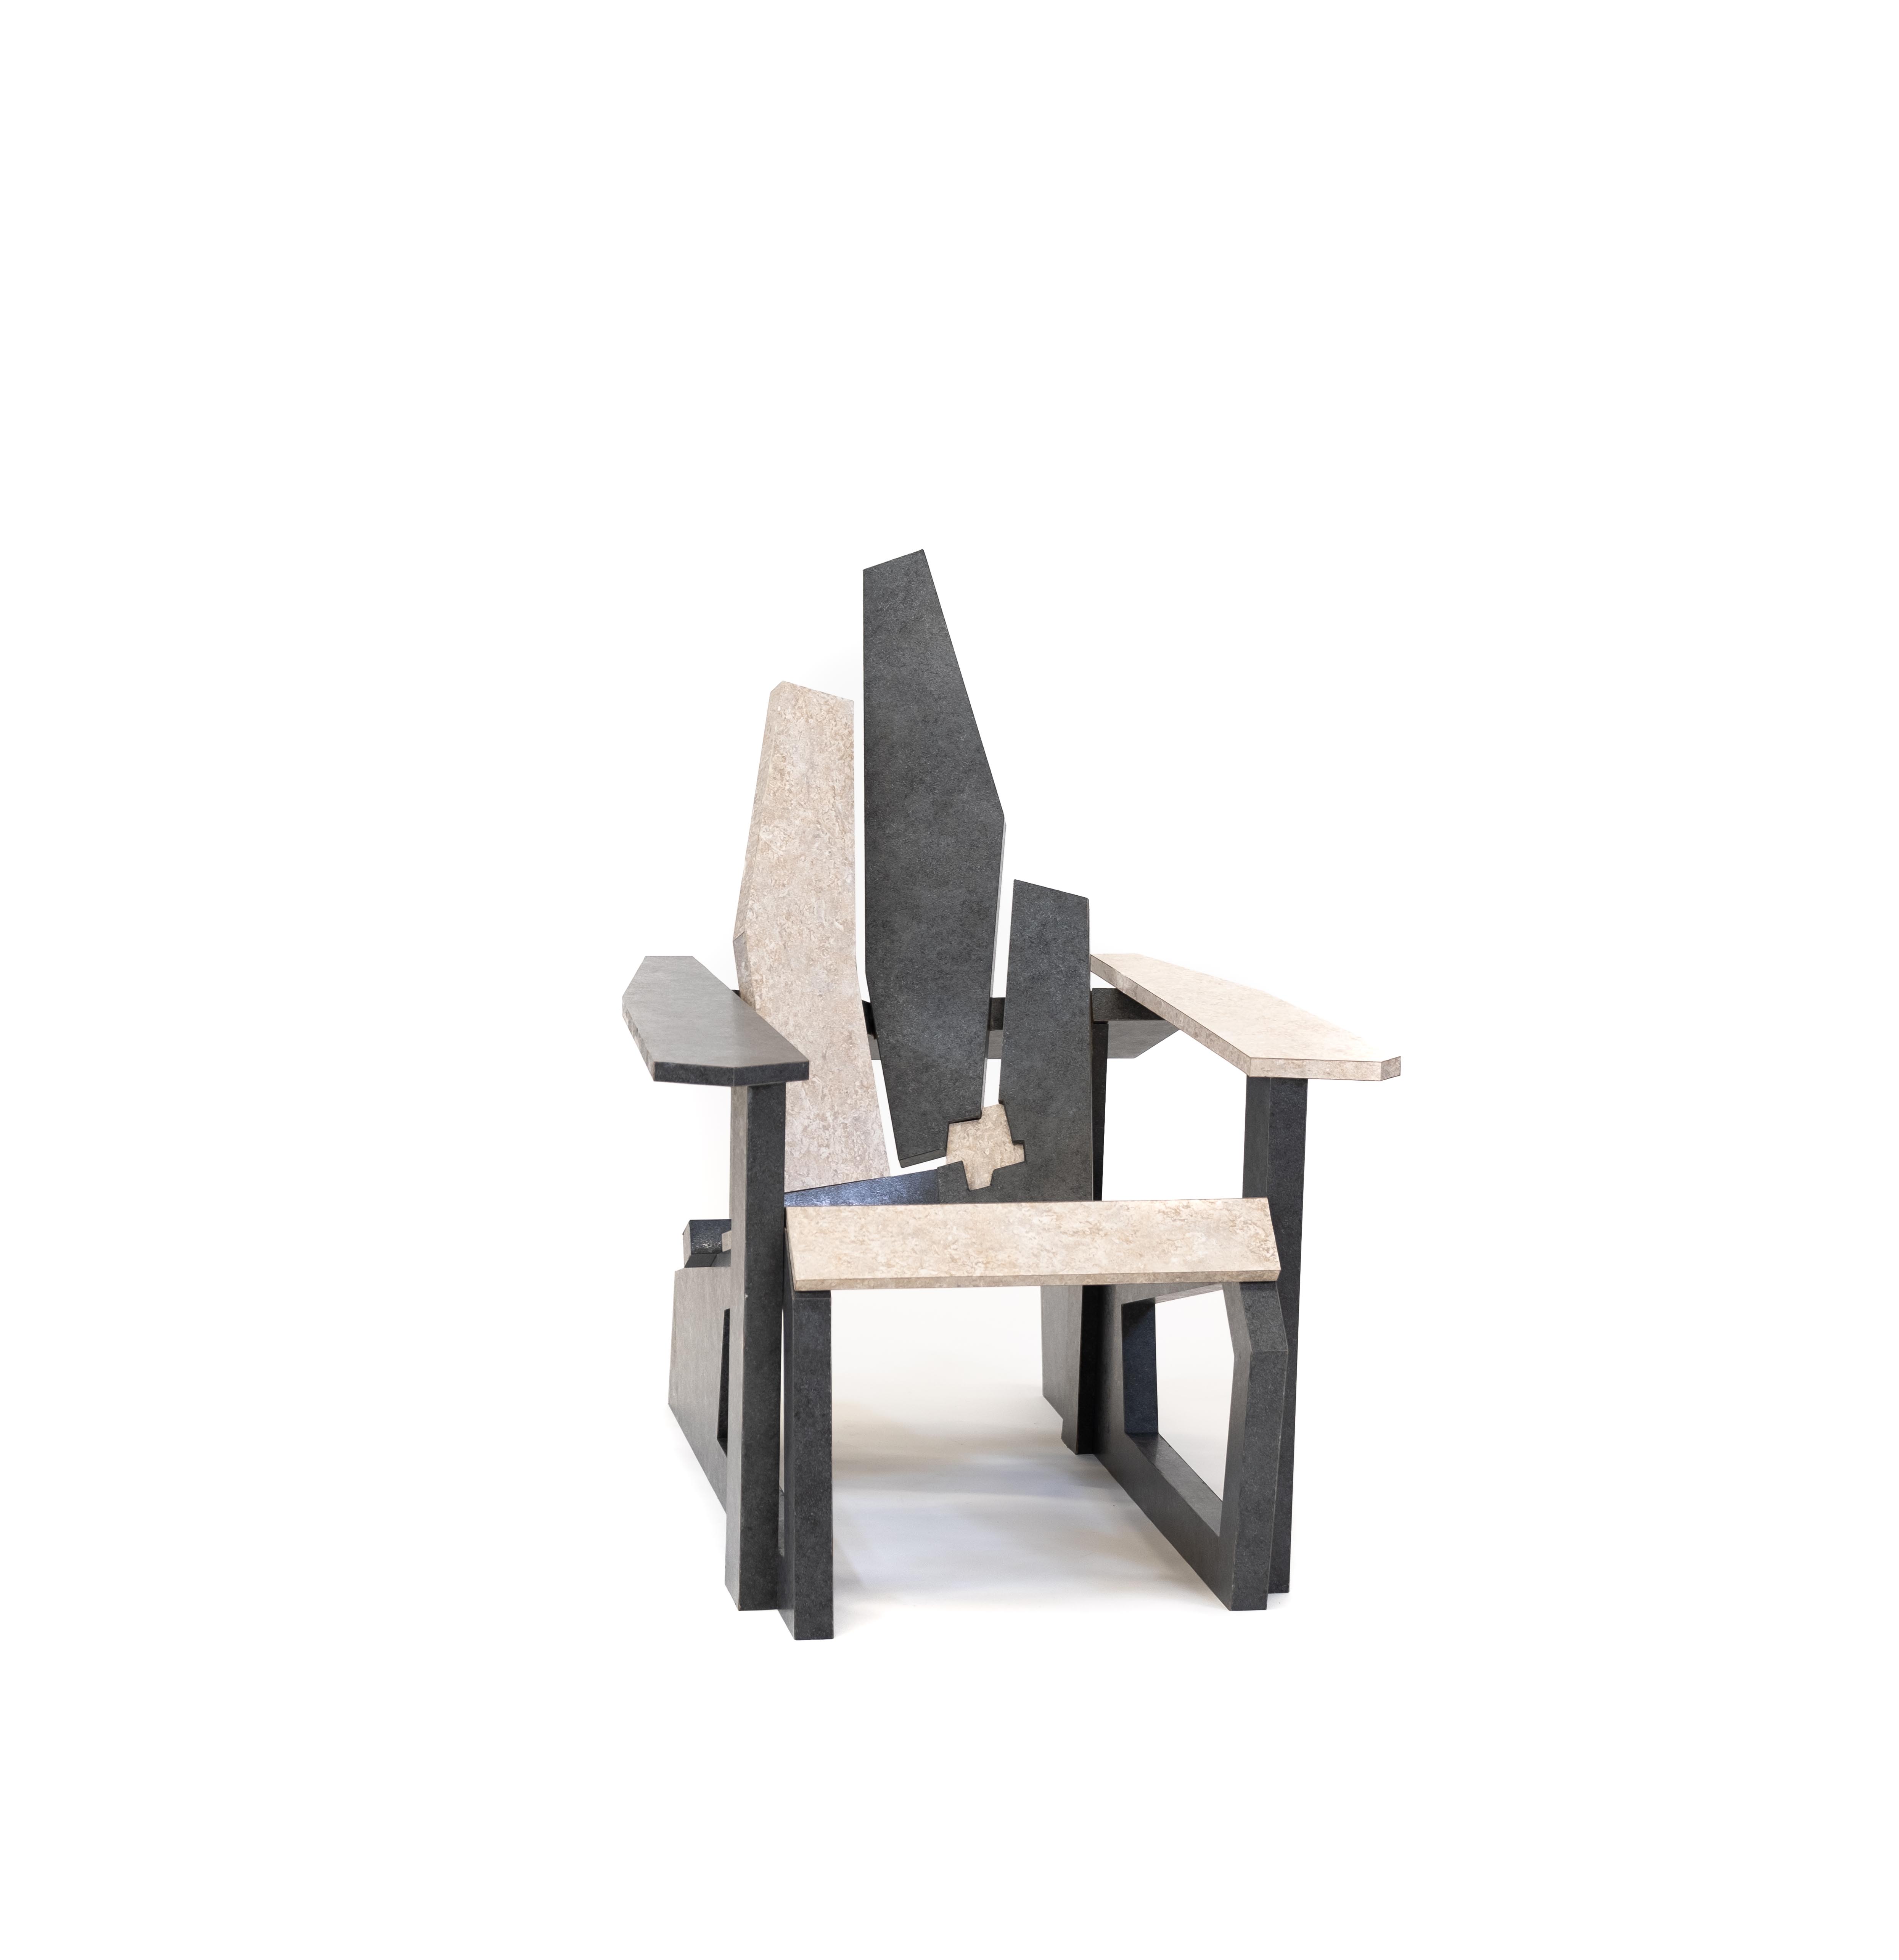 various jagged-looking grey shapes are assembled in the shape of a Muskoka chair. 